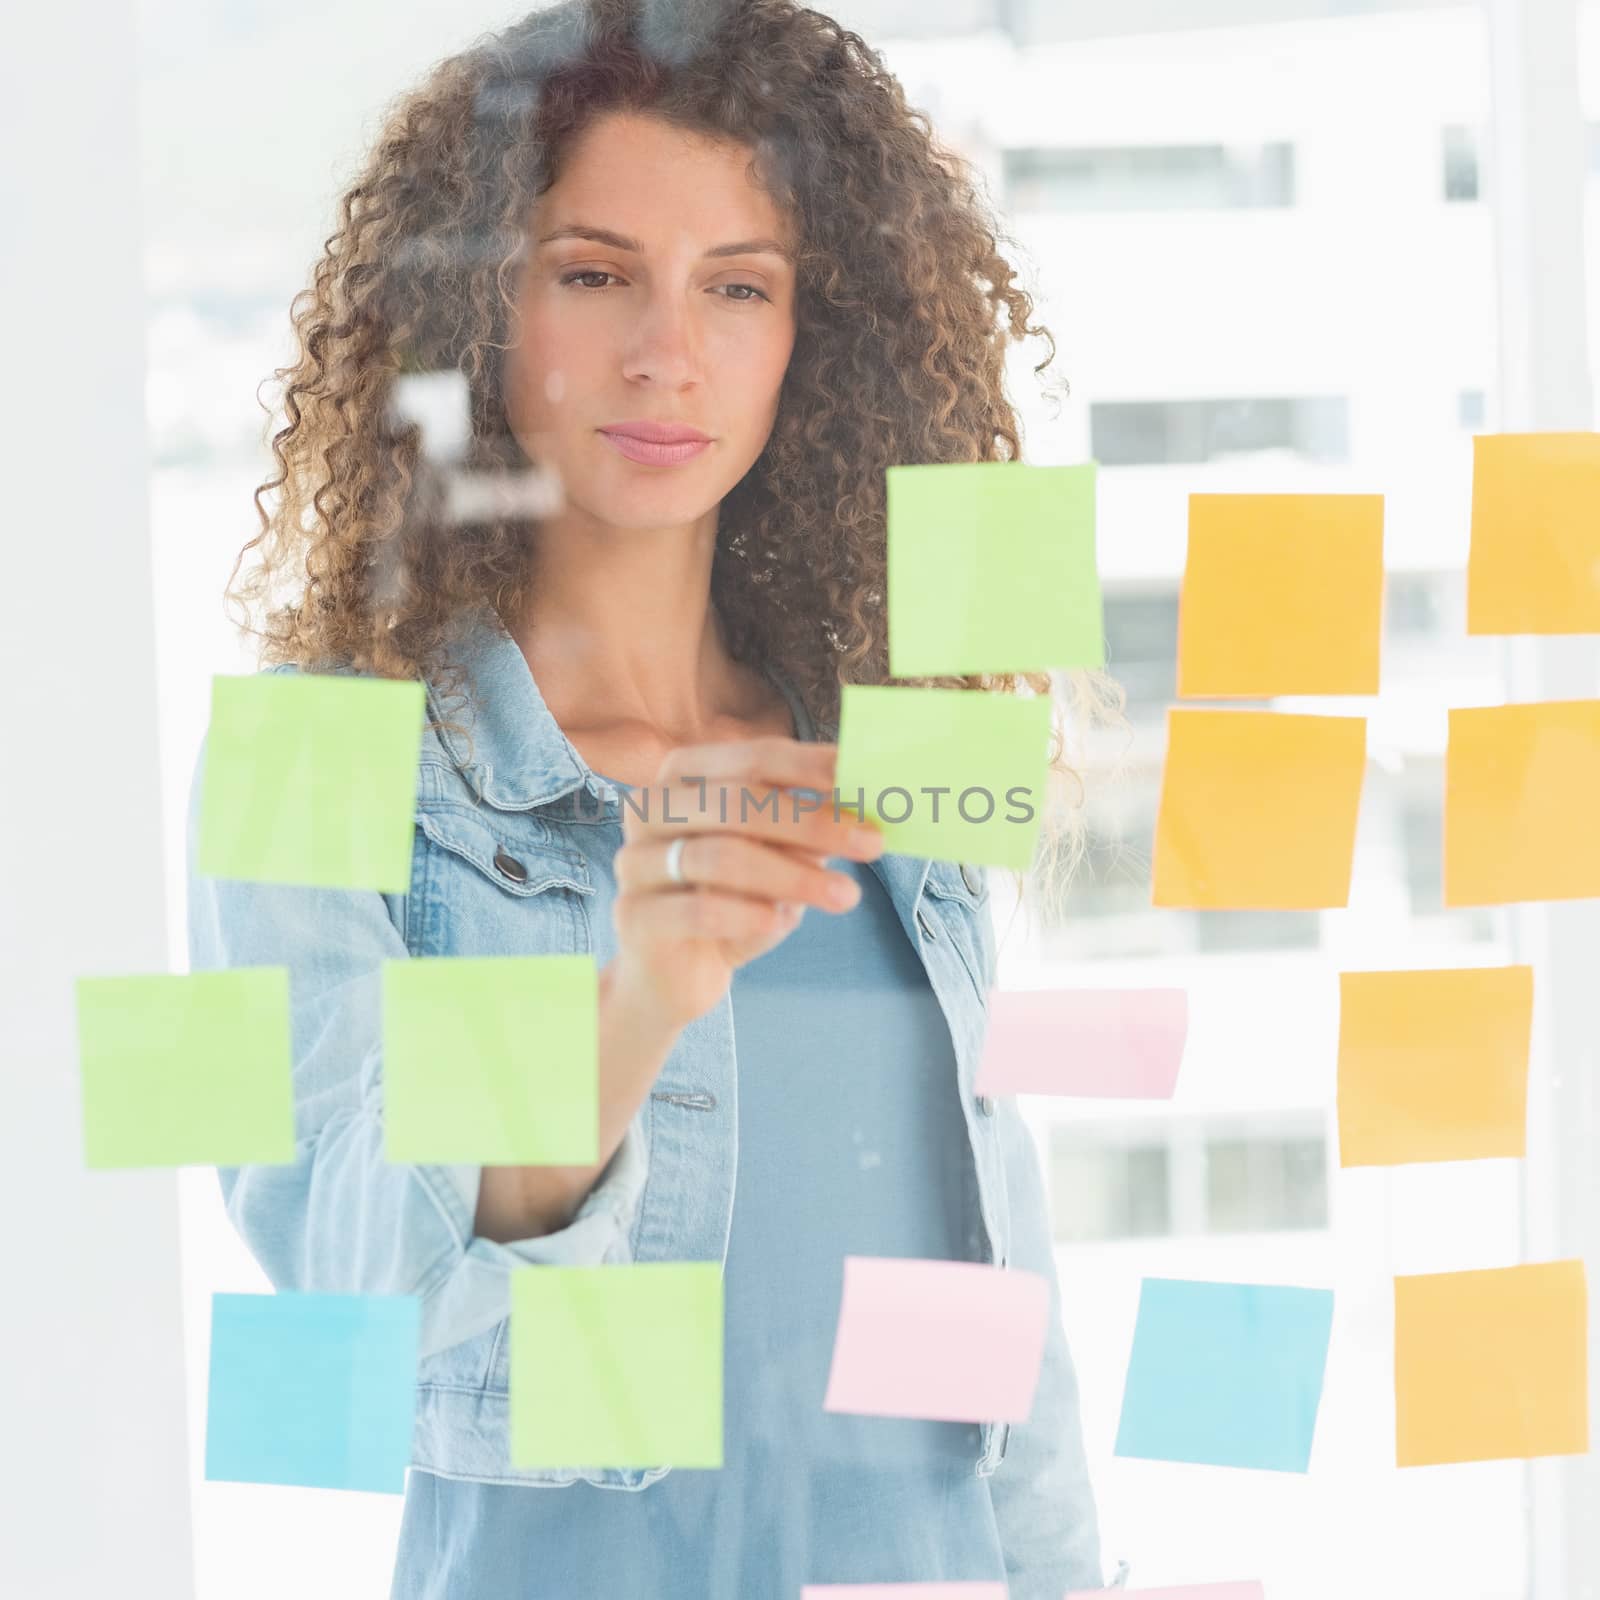 Focused designer looking at sticky notes on window by Wavebreakmedia